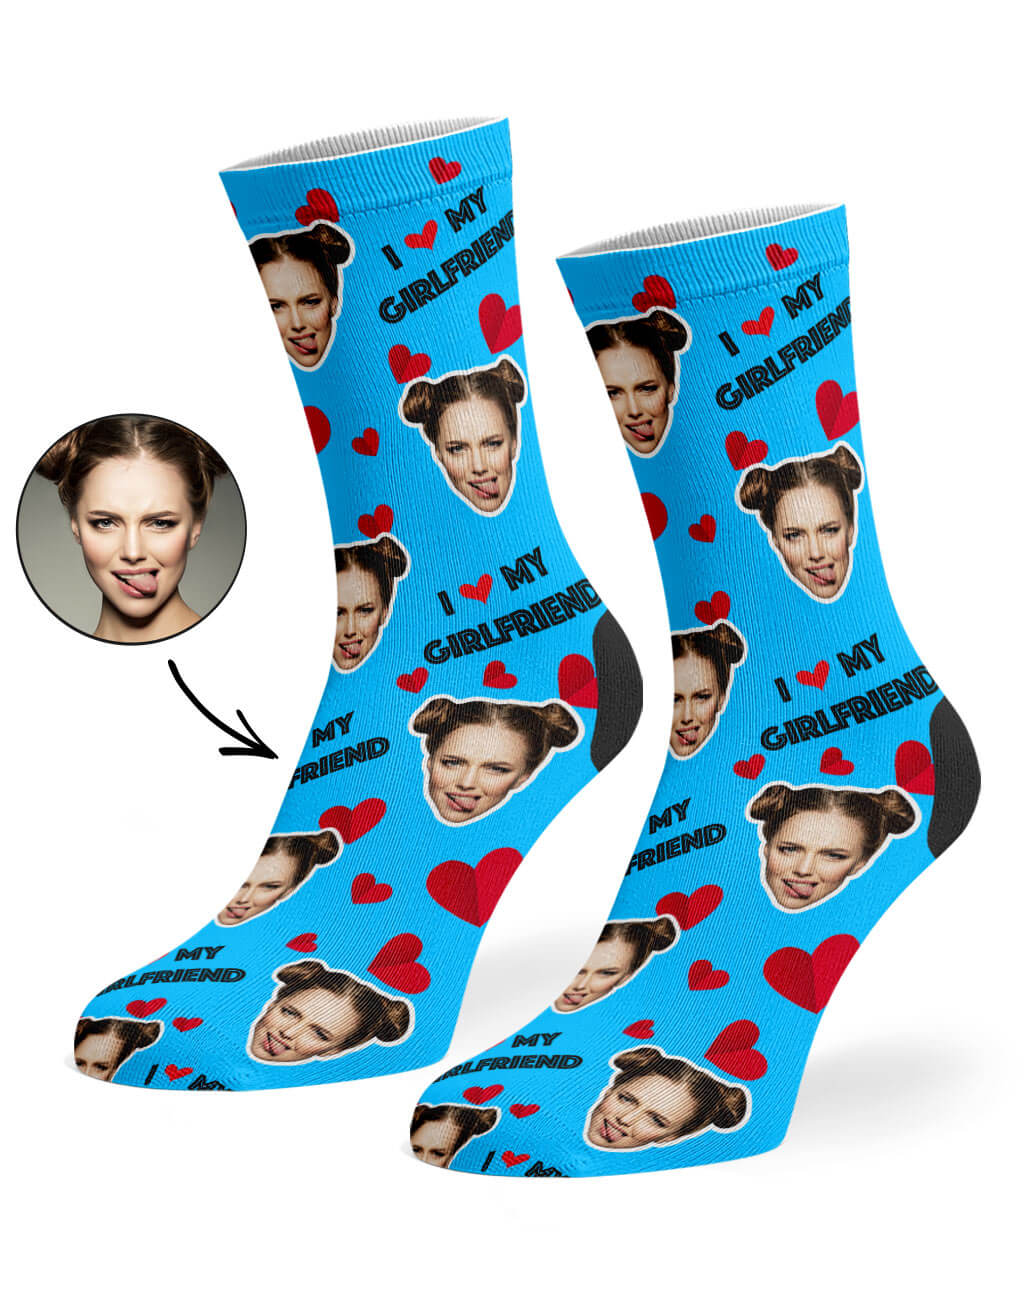 I Love My Girlfriend Socks for Sale by PoeticDesign